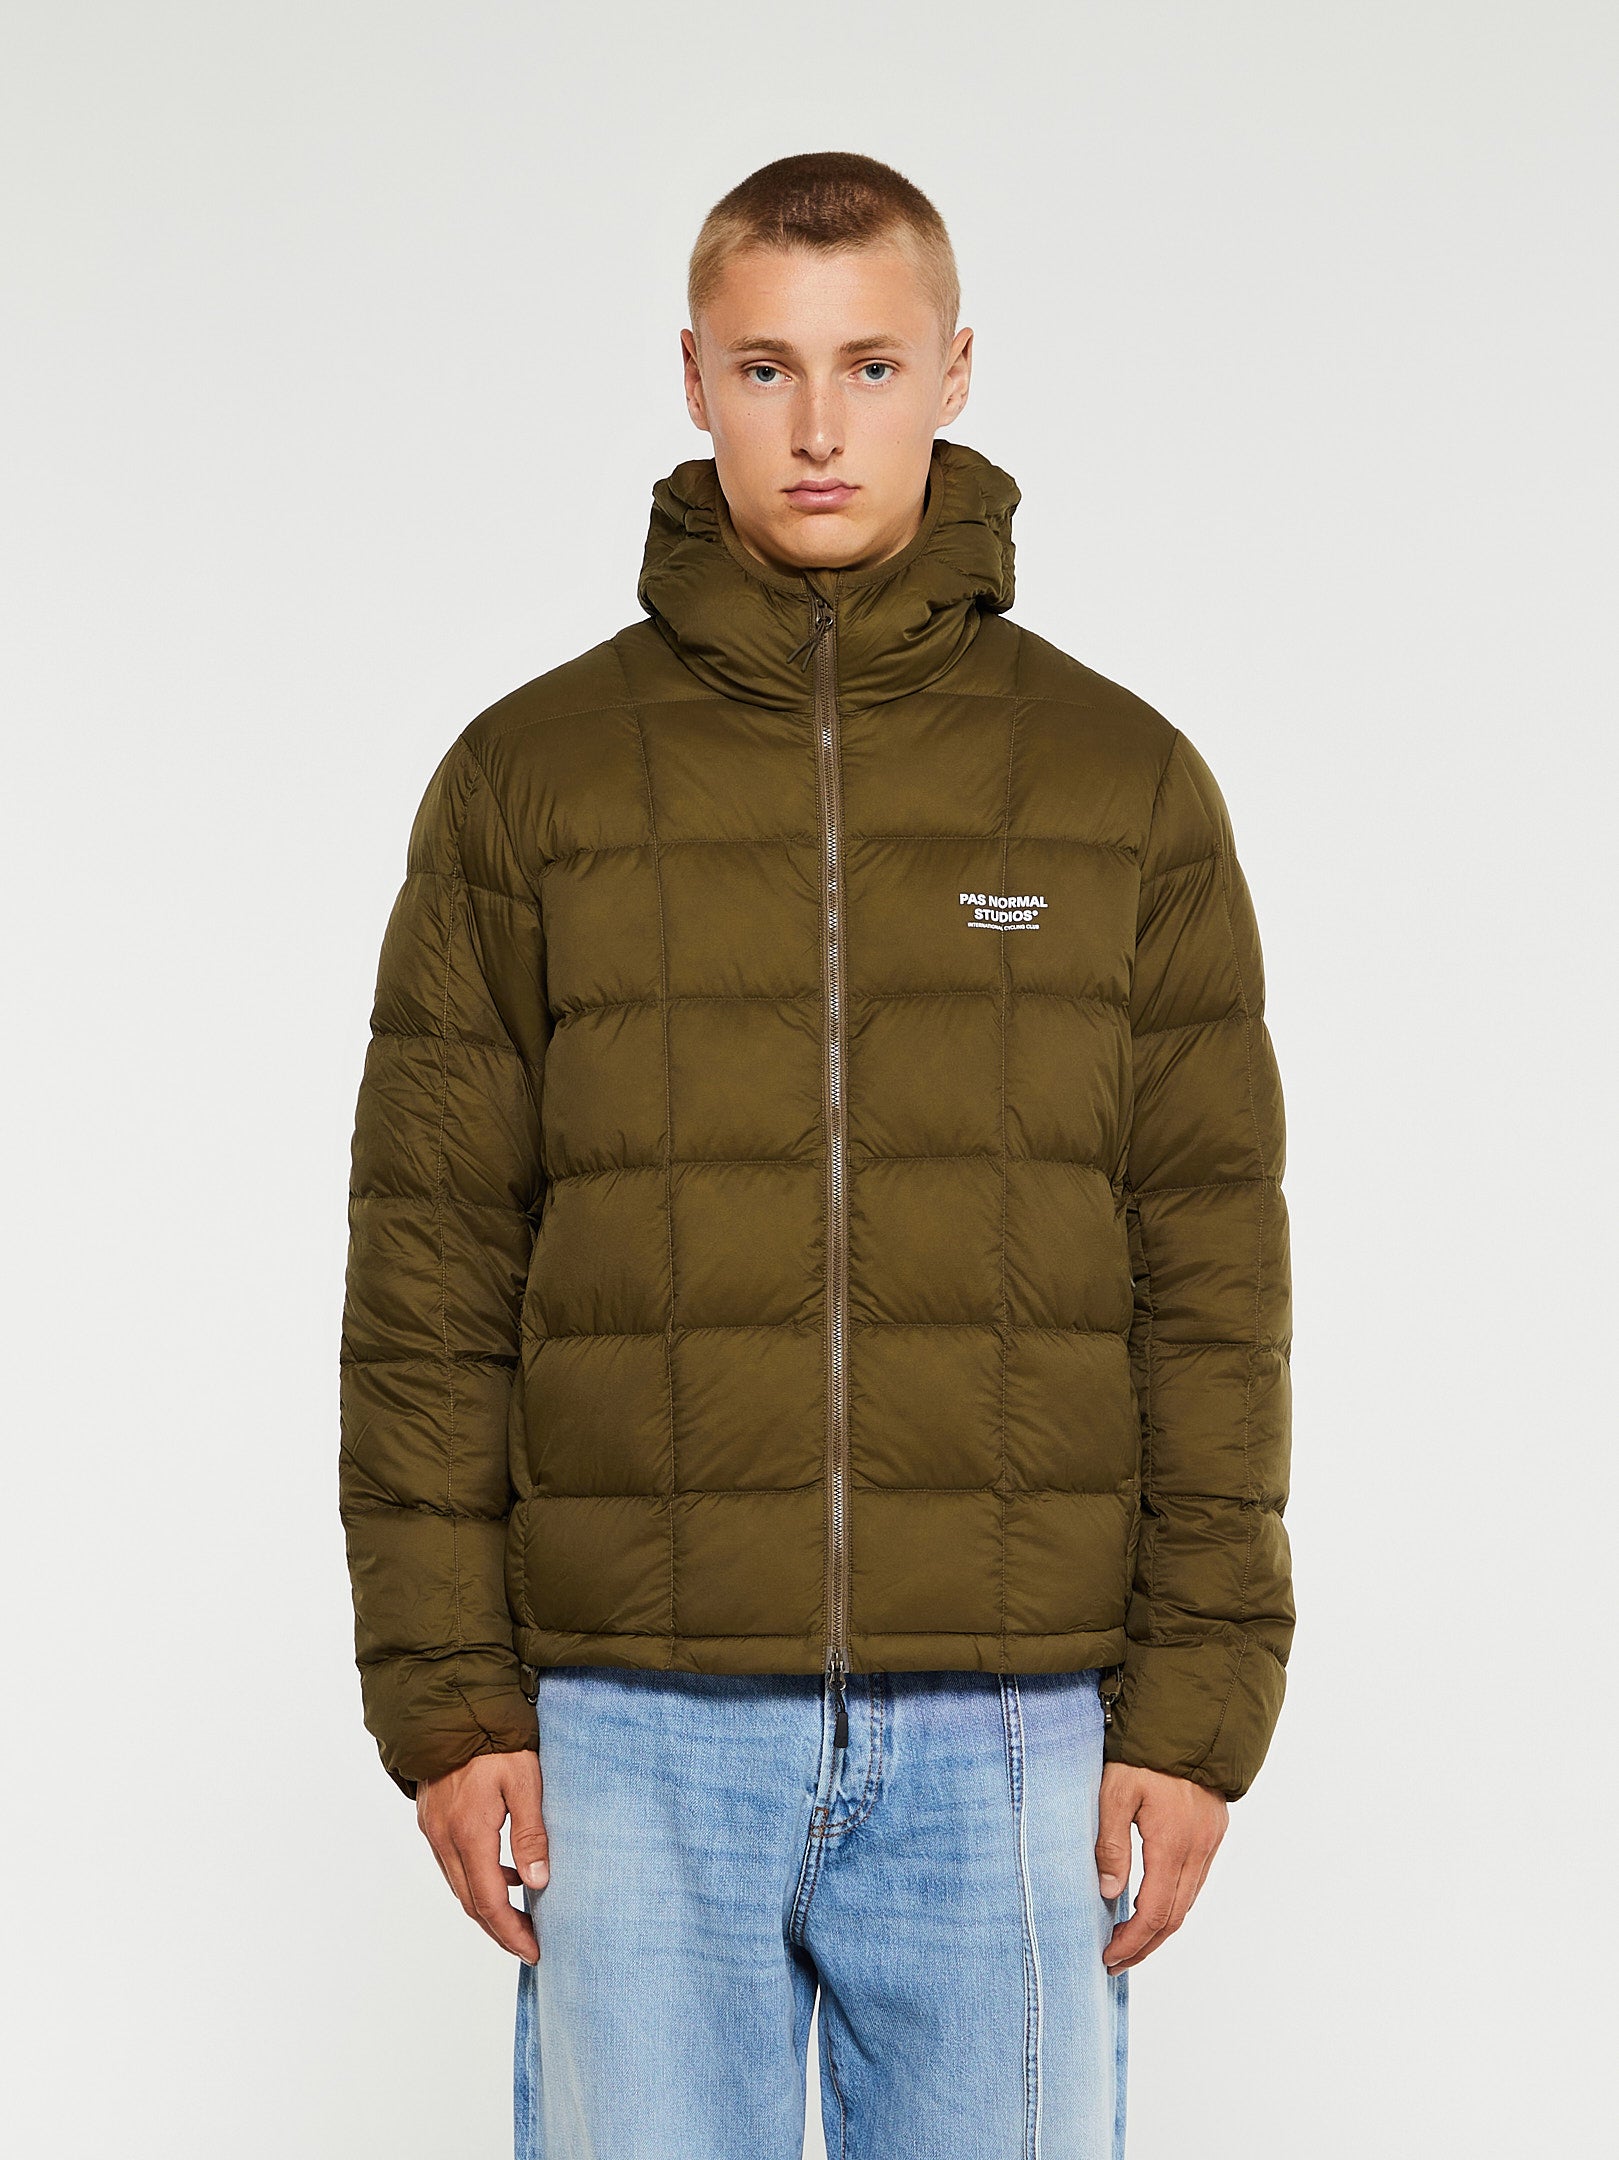 Pas Normal Studios - Off-Race Down Jacket in Army Brown